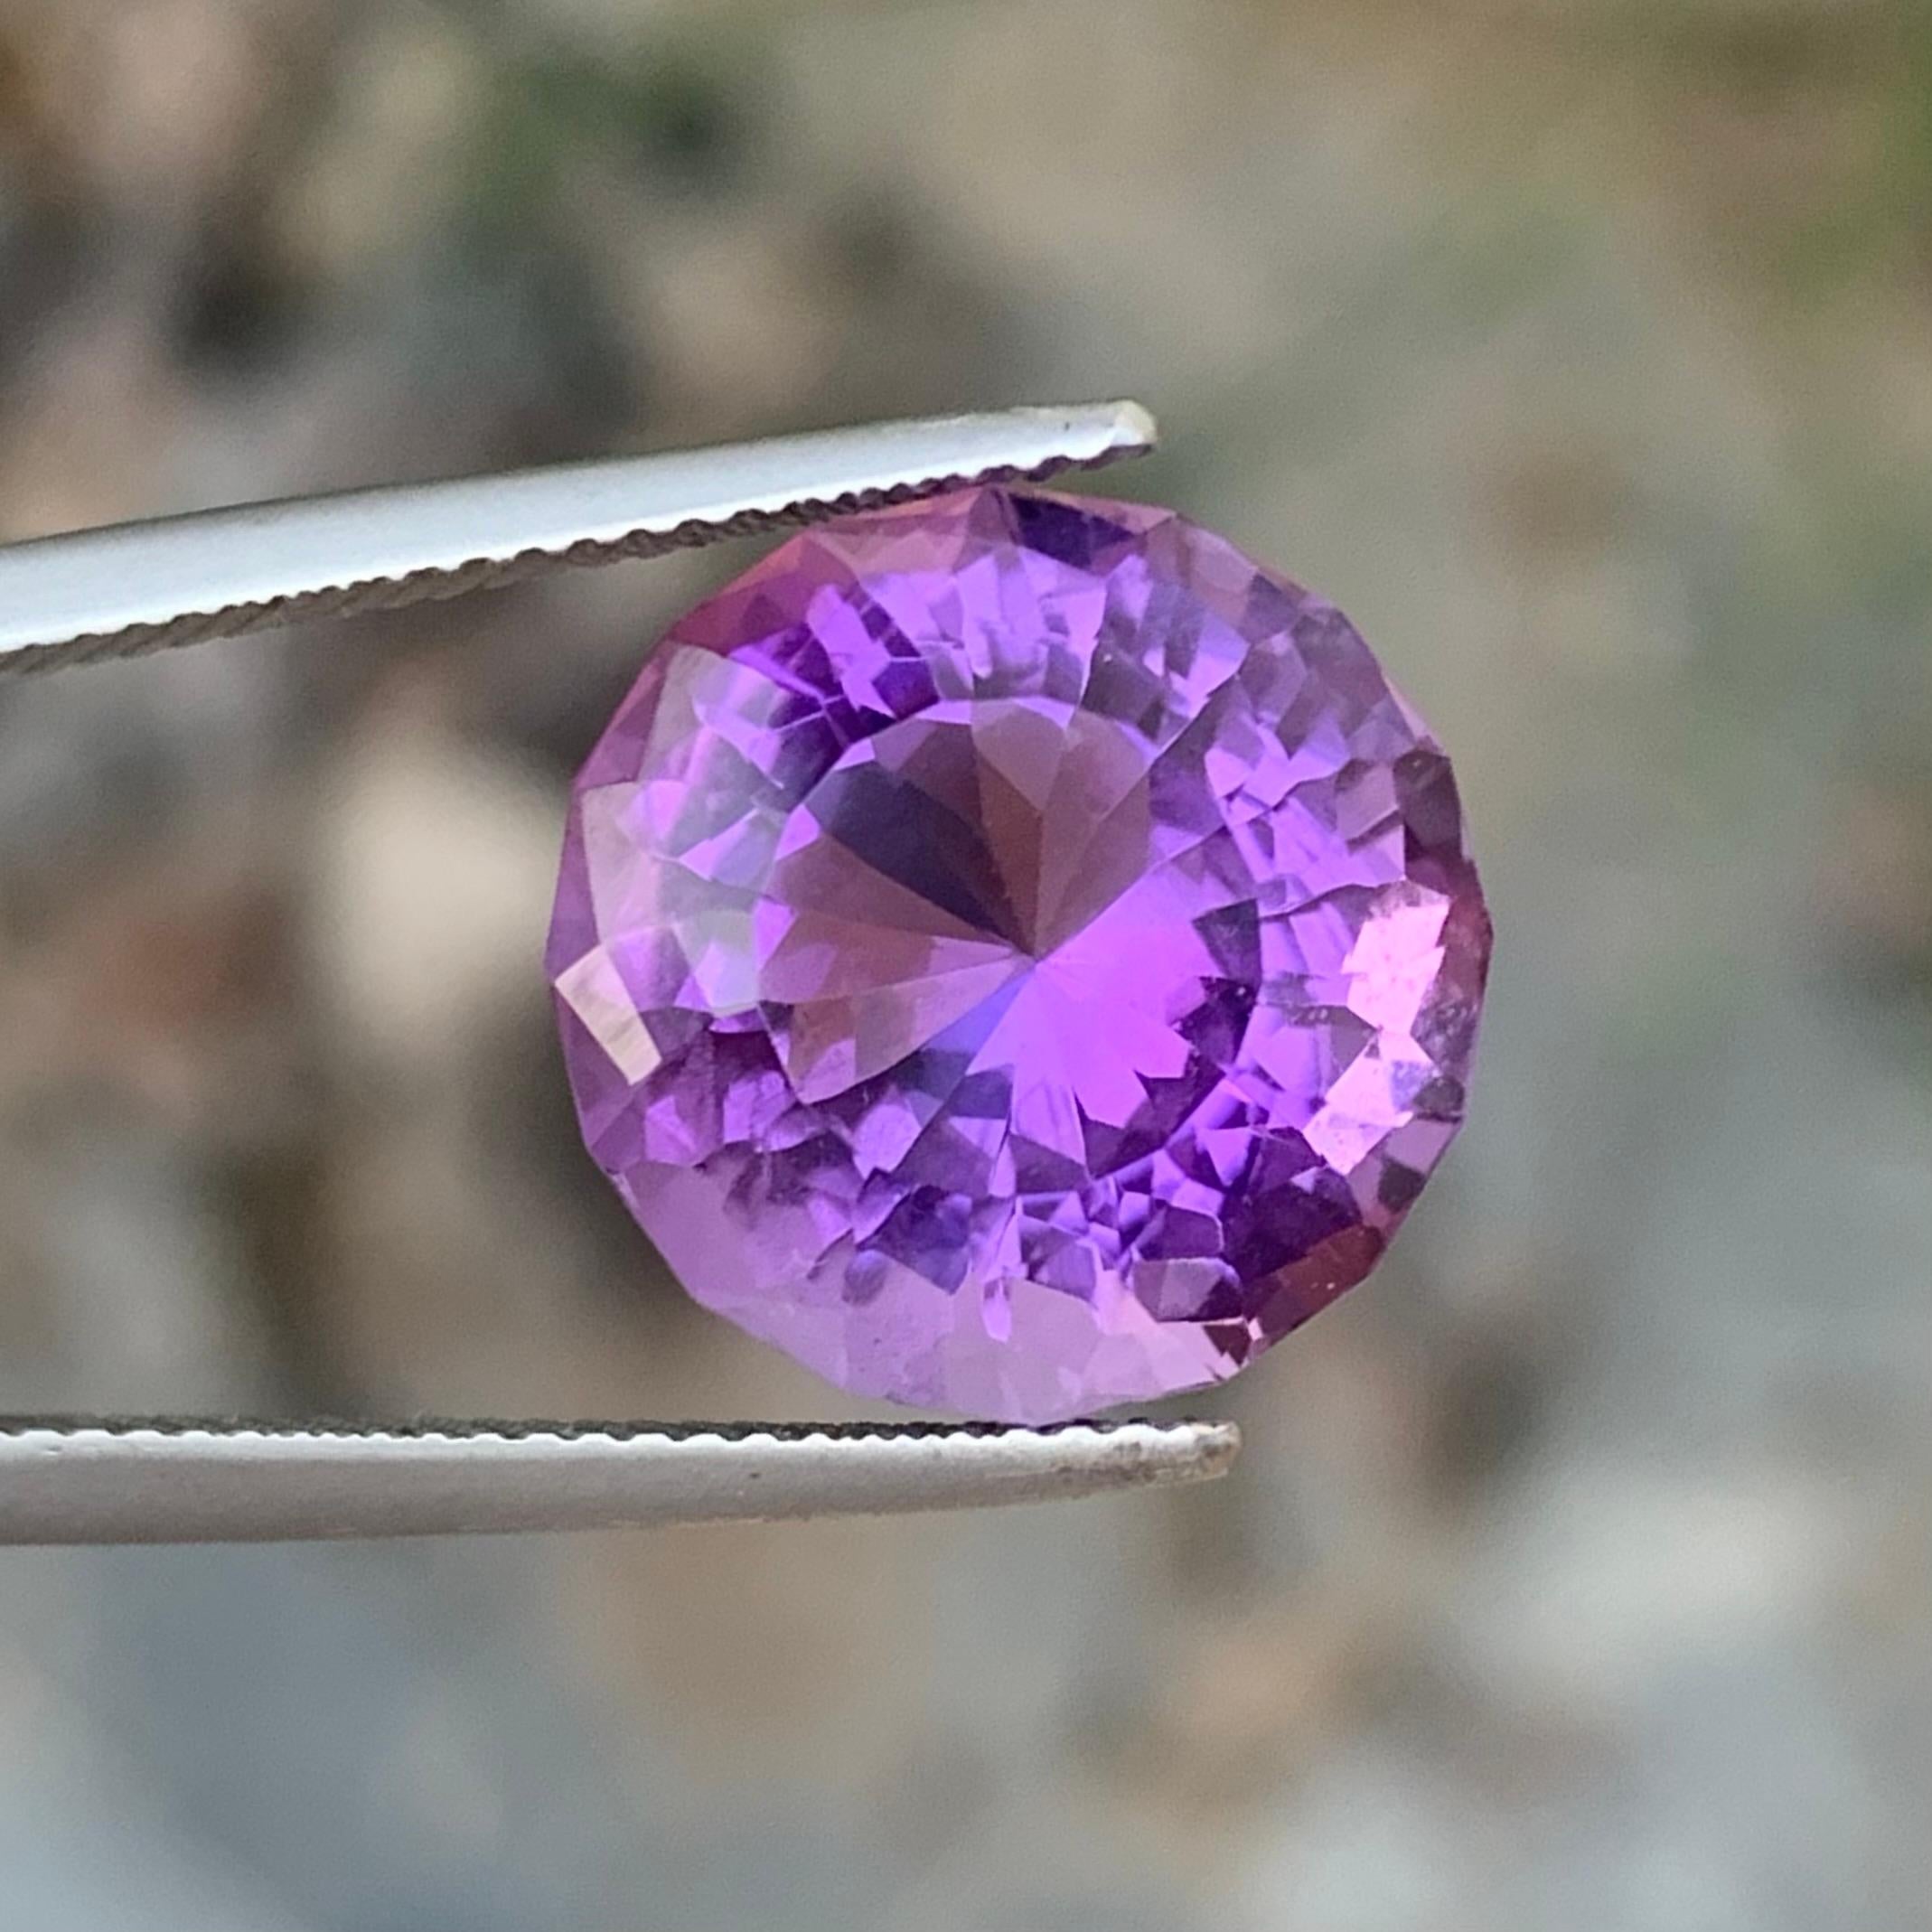 Facet Amethyst 
Weight: 7.75 Carats 
Dimension: 13.3x13.1x8.3 Mm
Origin: Brazil 
Color: Purple
Shape: Round
Treatment: Non
Certificate; On Customer Demand 
Amethyst, a gemstone of captivating purple beauty, has enchanted humanity for millennia with